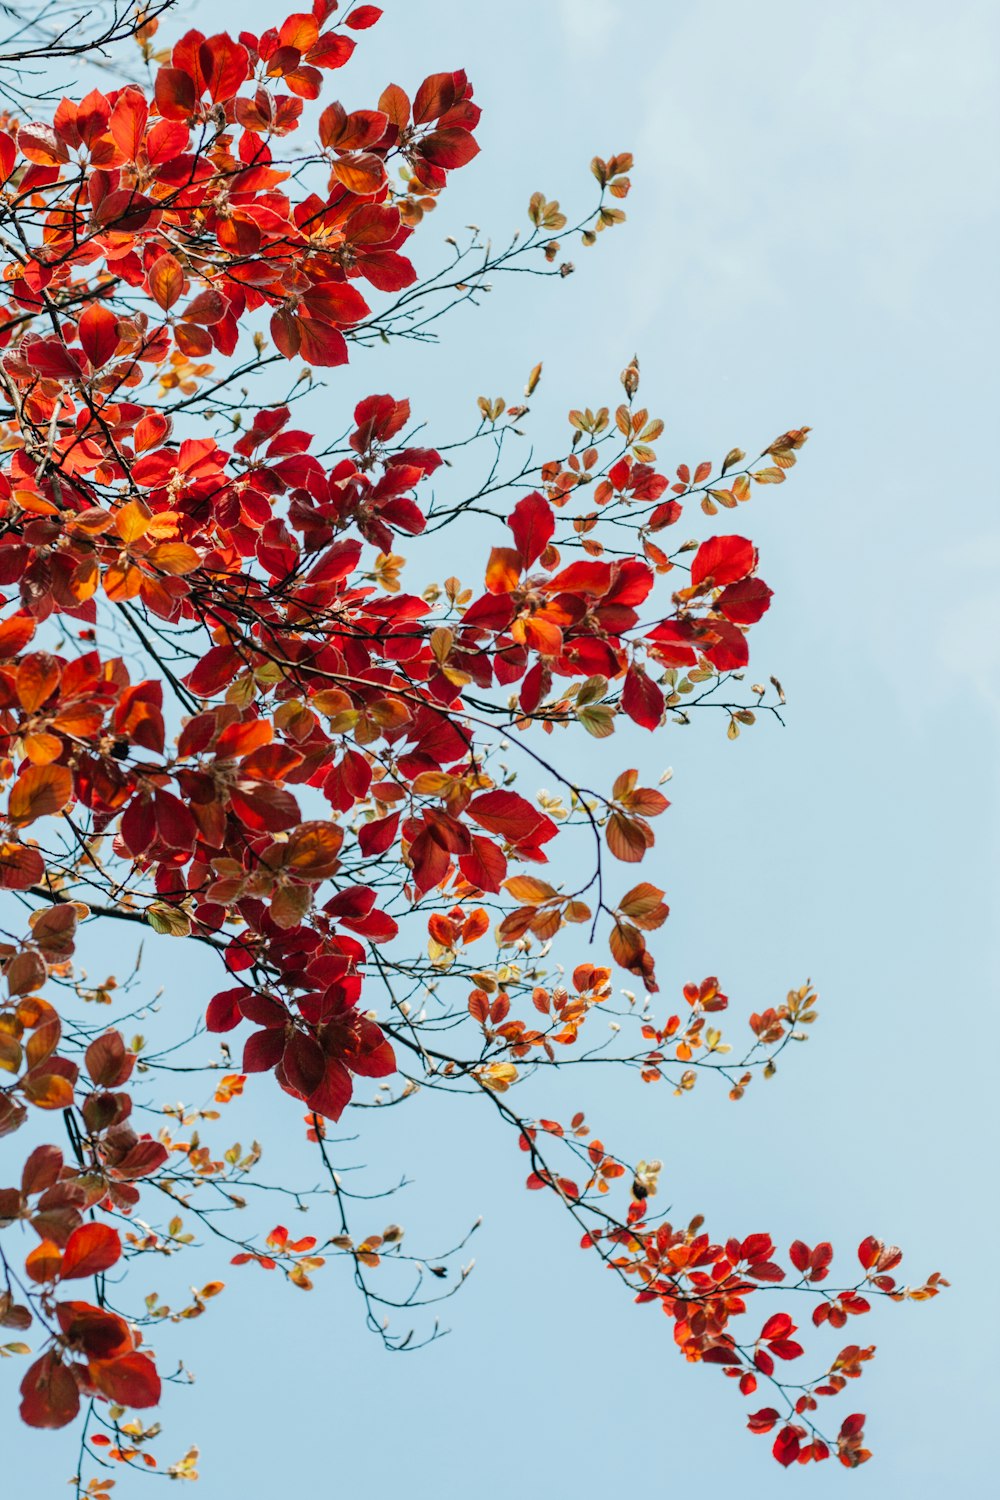 a tree with red and yellow leaves against a blue sky